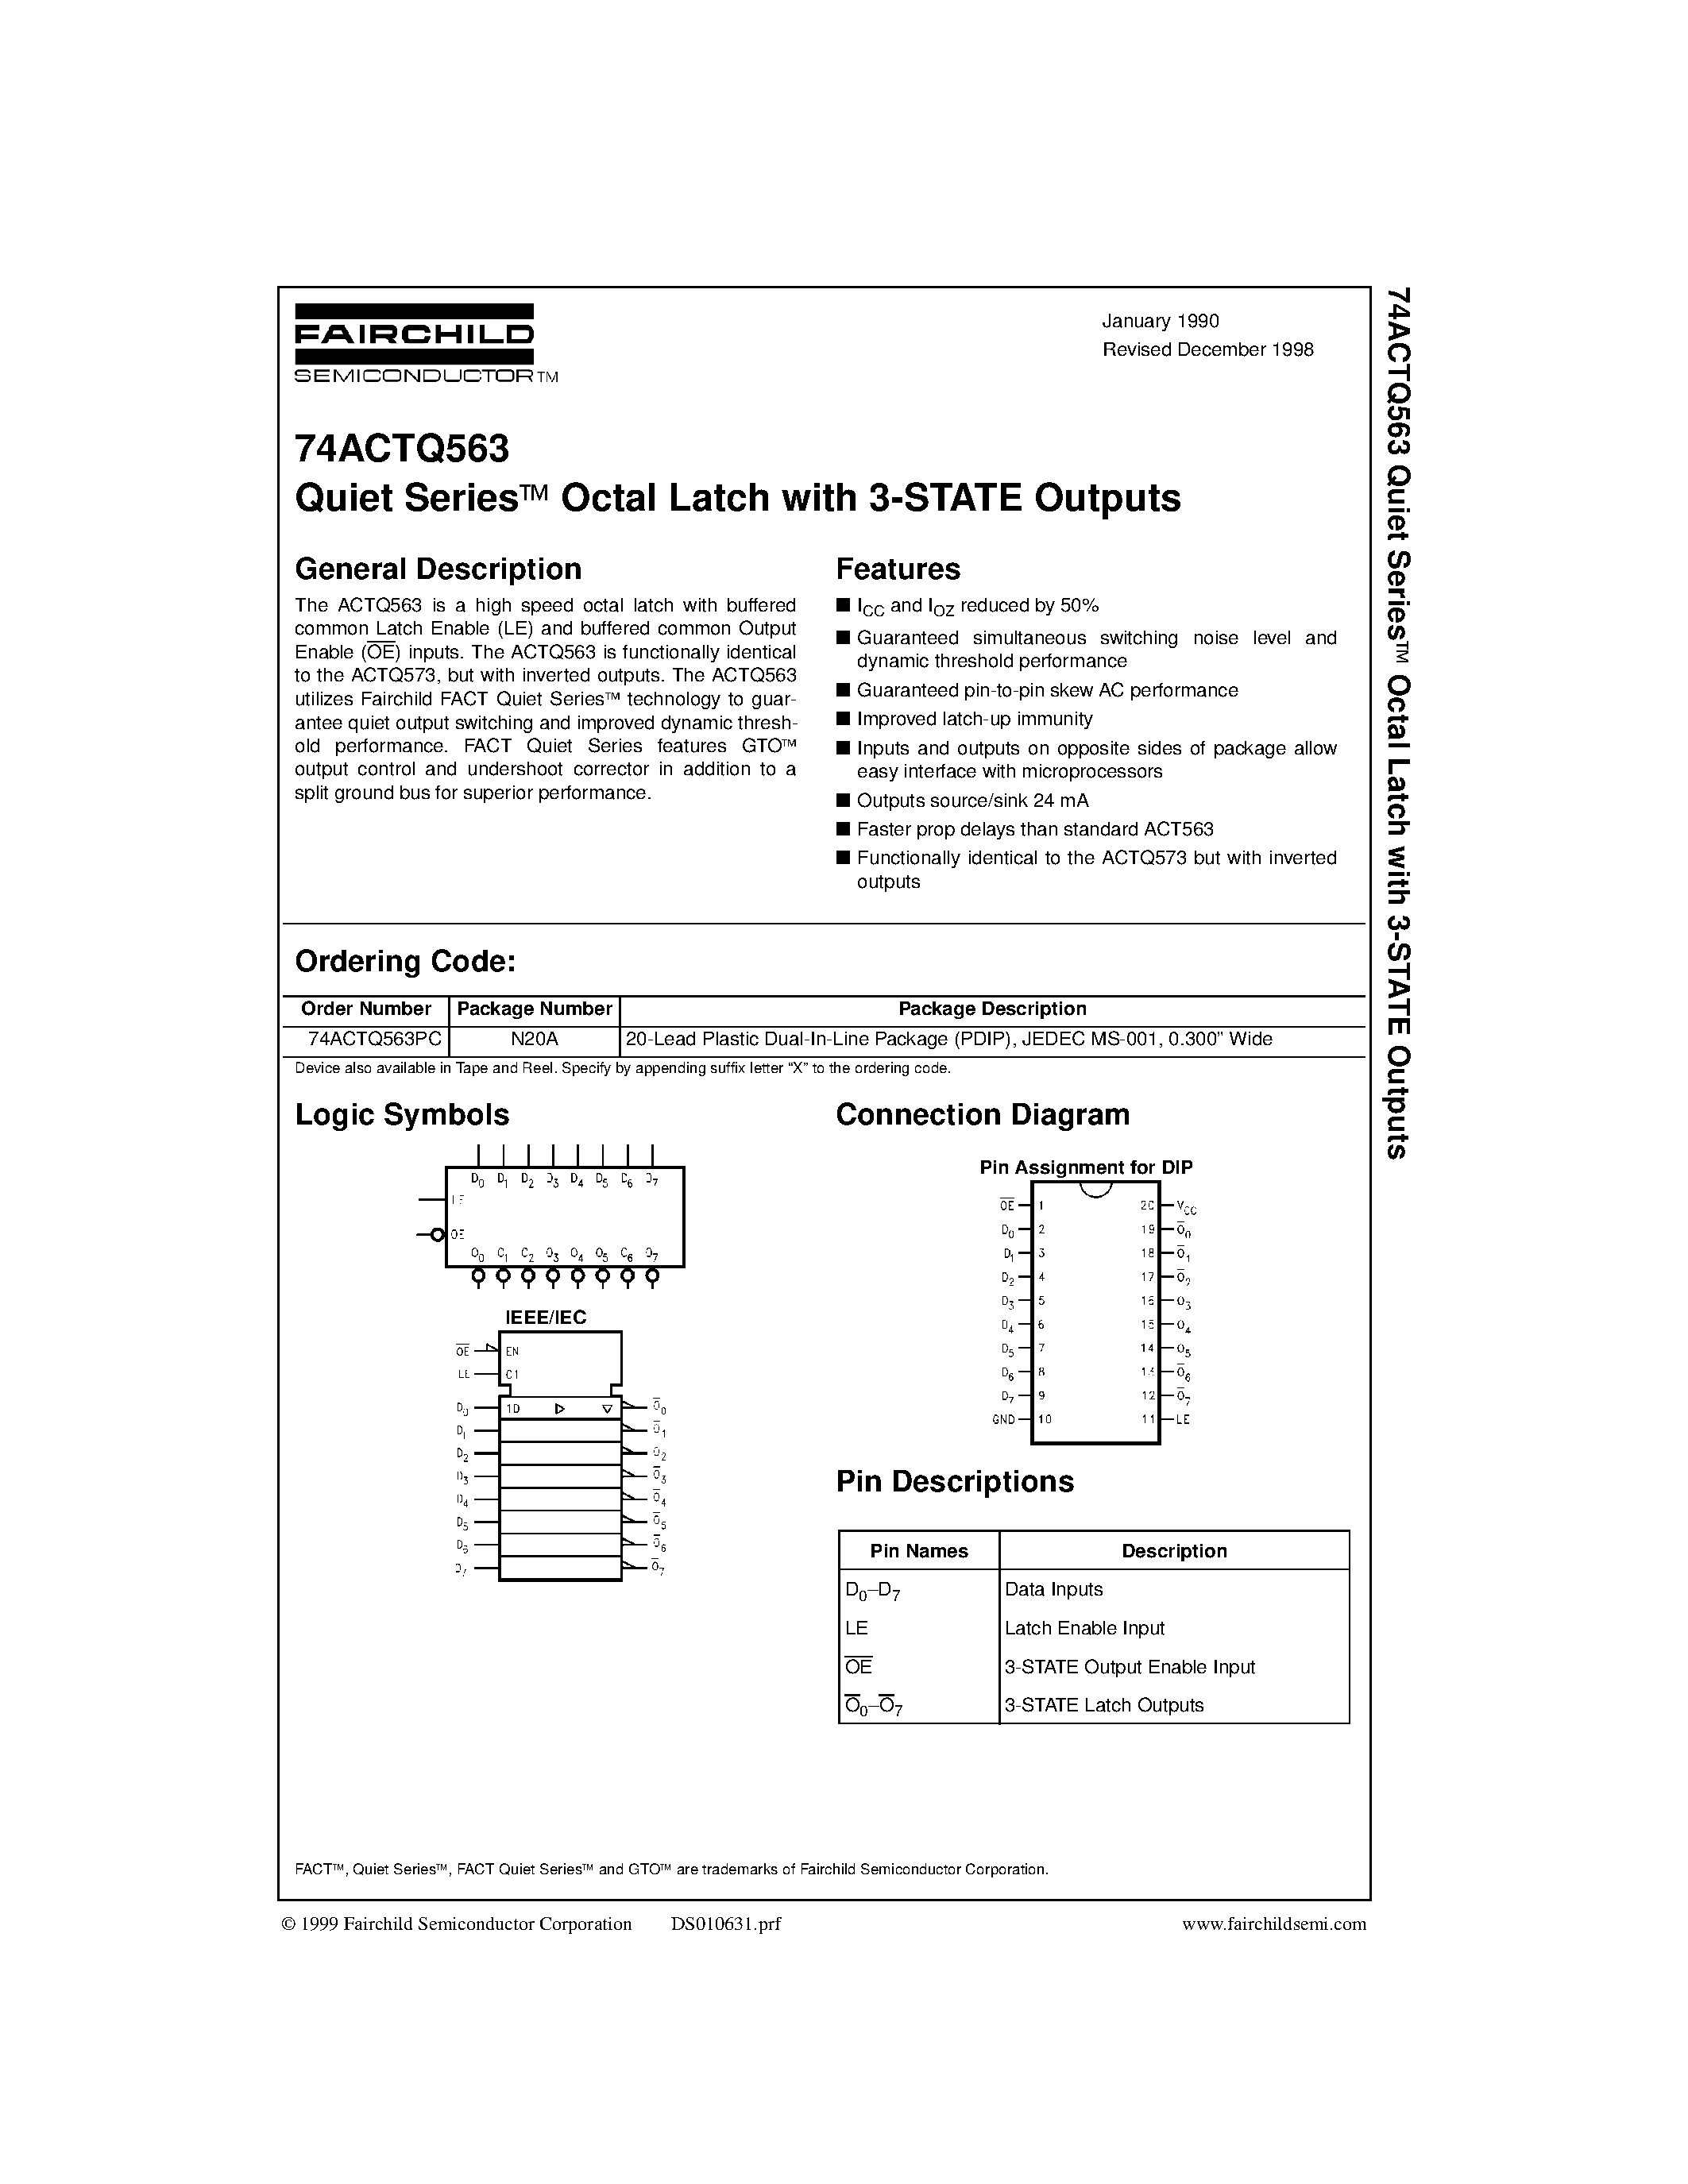 Datasheet 74ACTQ563PC - Quiet Series Octal Latch with 3-STATE Outputs page 1